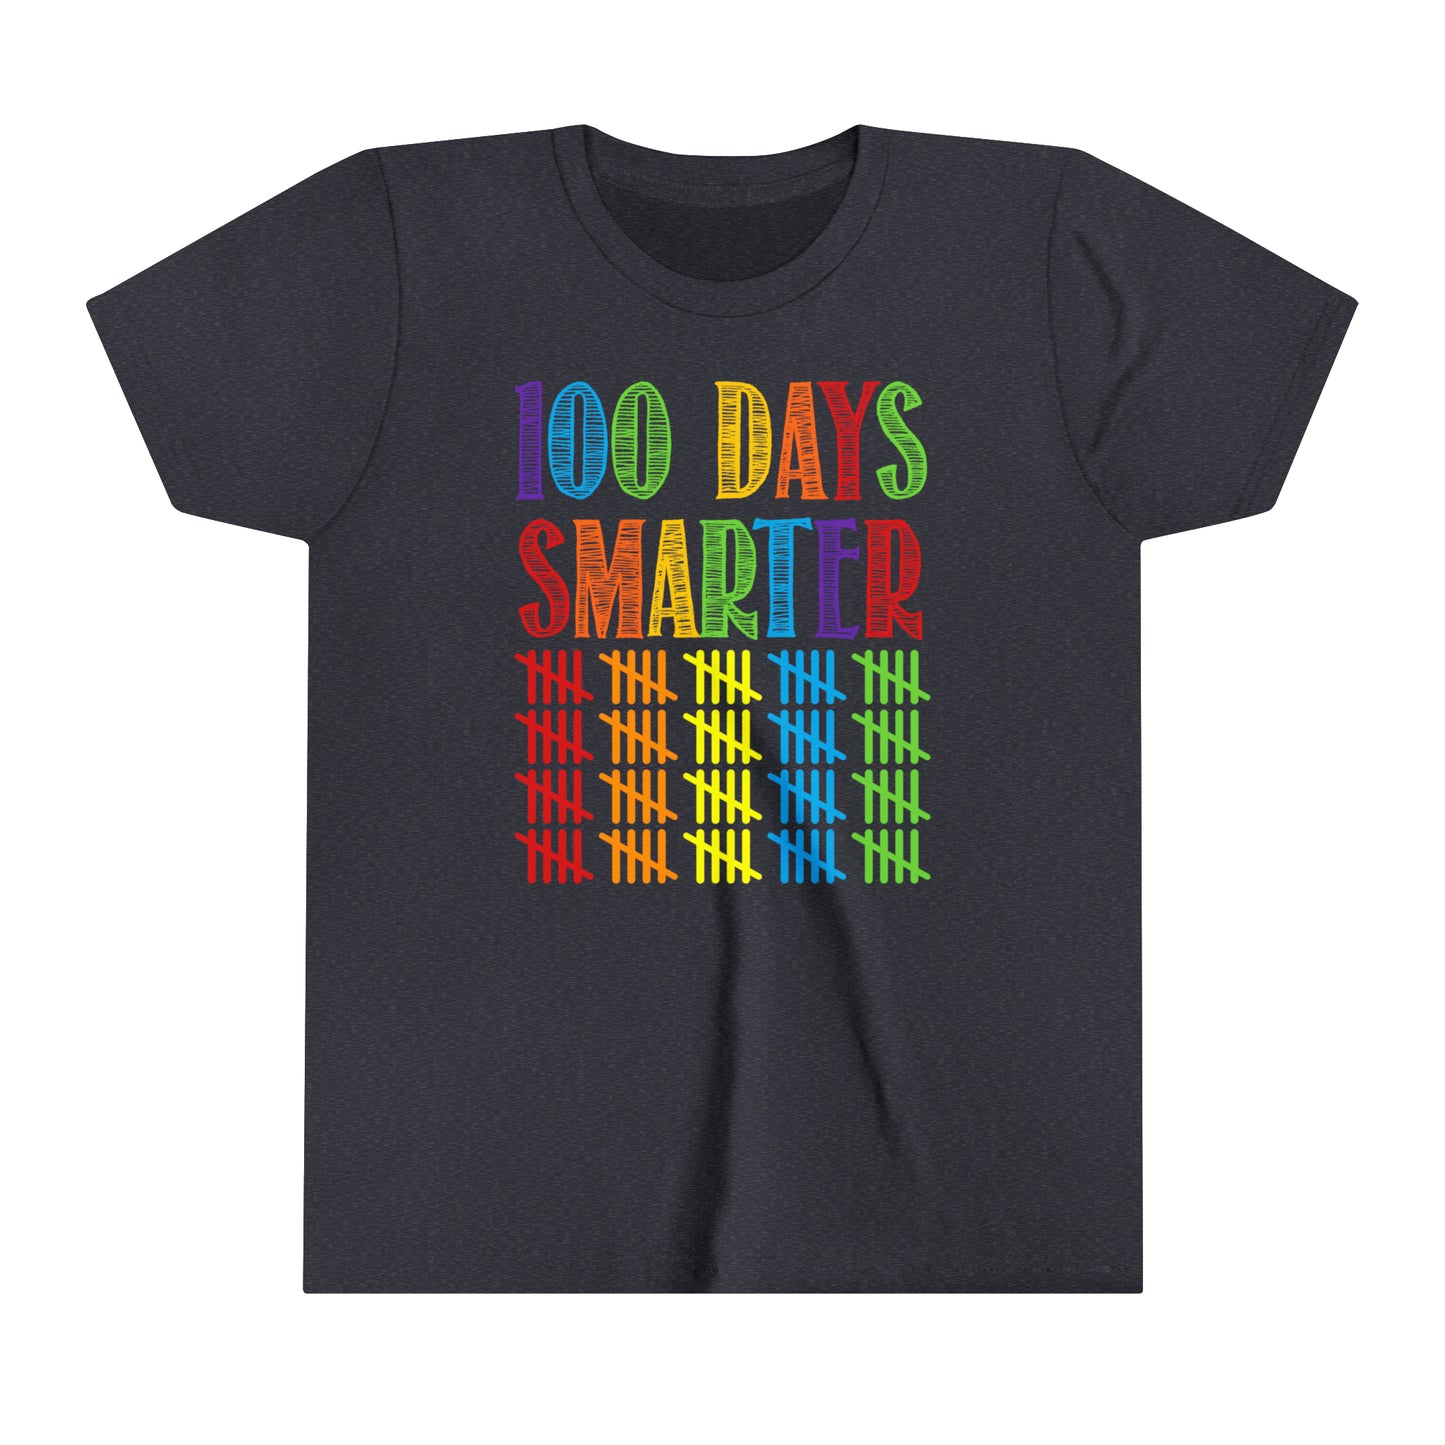 100 Days Smarter 100 Days of School Youth Boy's and Girl's Unisex Short Sleeve Tee